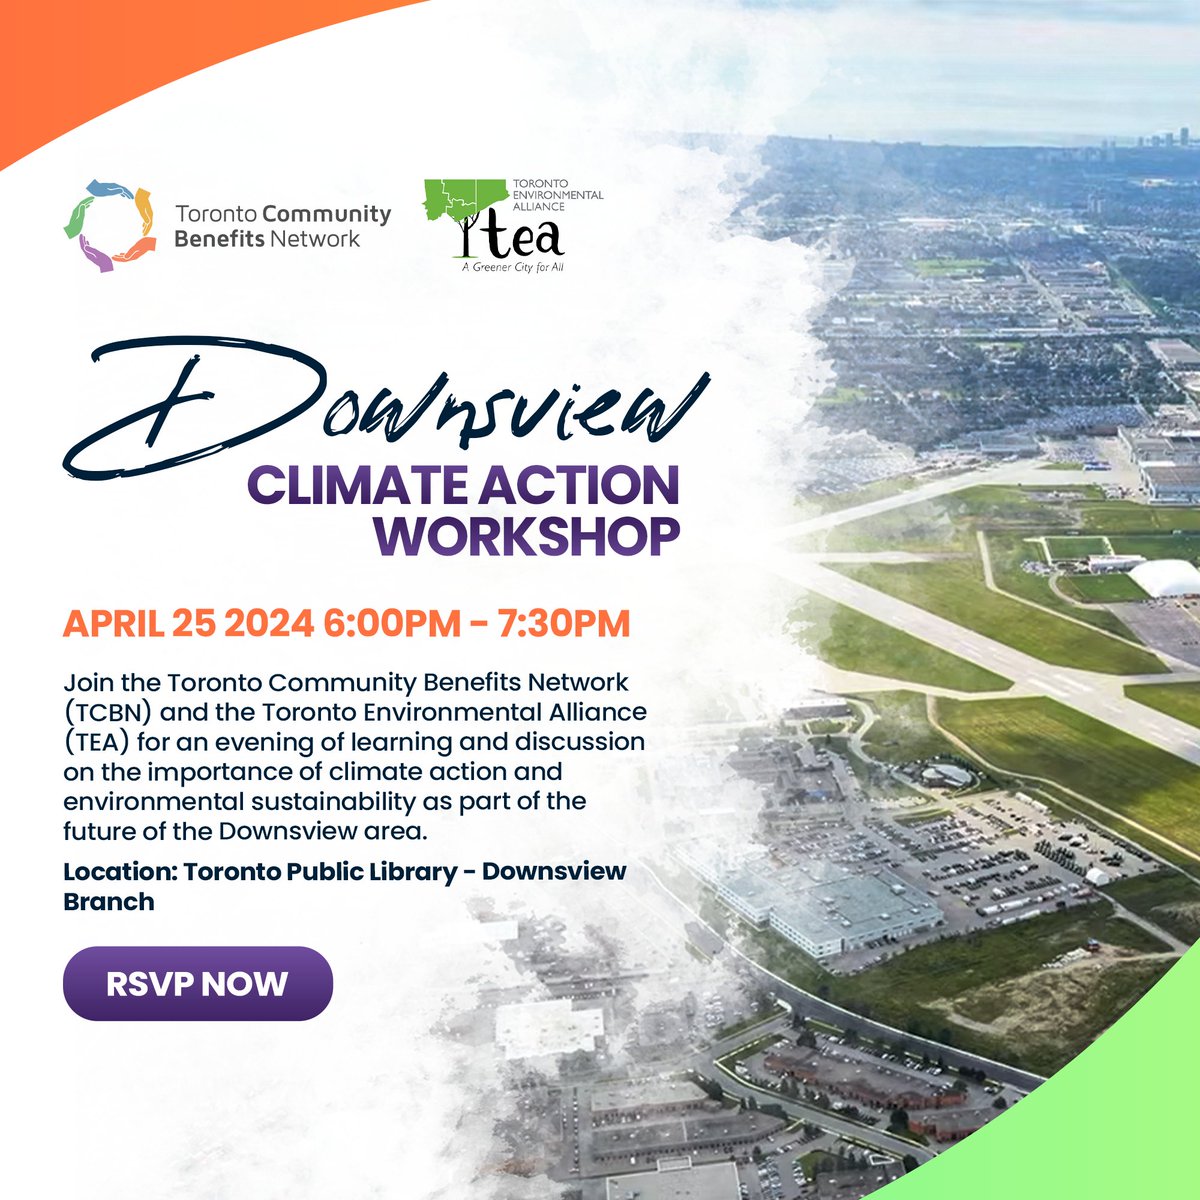 HAPPENING TOMORROW TCBN and @TOenviro are hosting a Climate Action Workshop to discuss the importance of climate action and environmental sustainability as part of the future of the Downsview area RSVP now at communitybenefits.ca/downsview_clim… #communitybenefits #climateaction #downsview